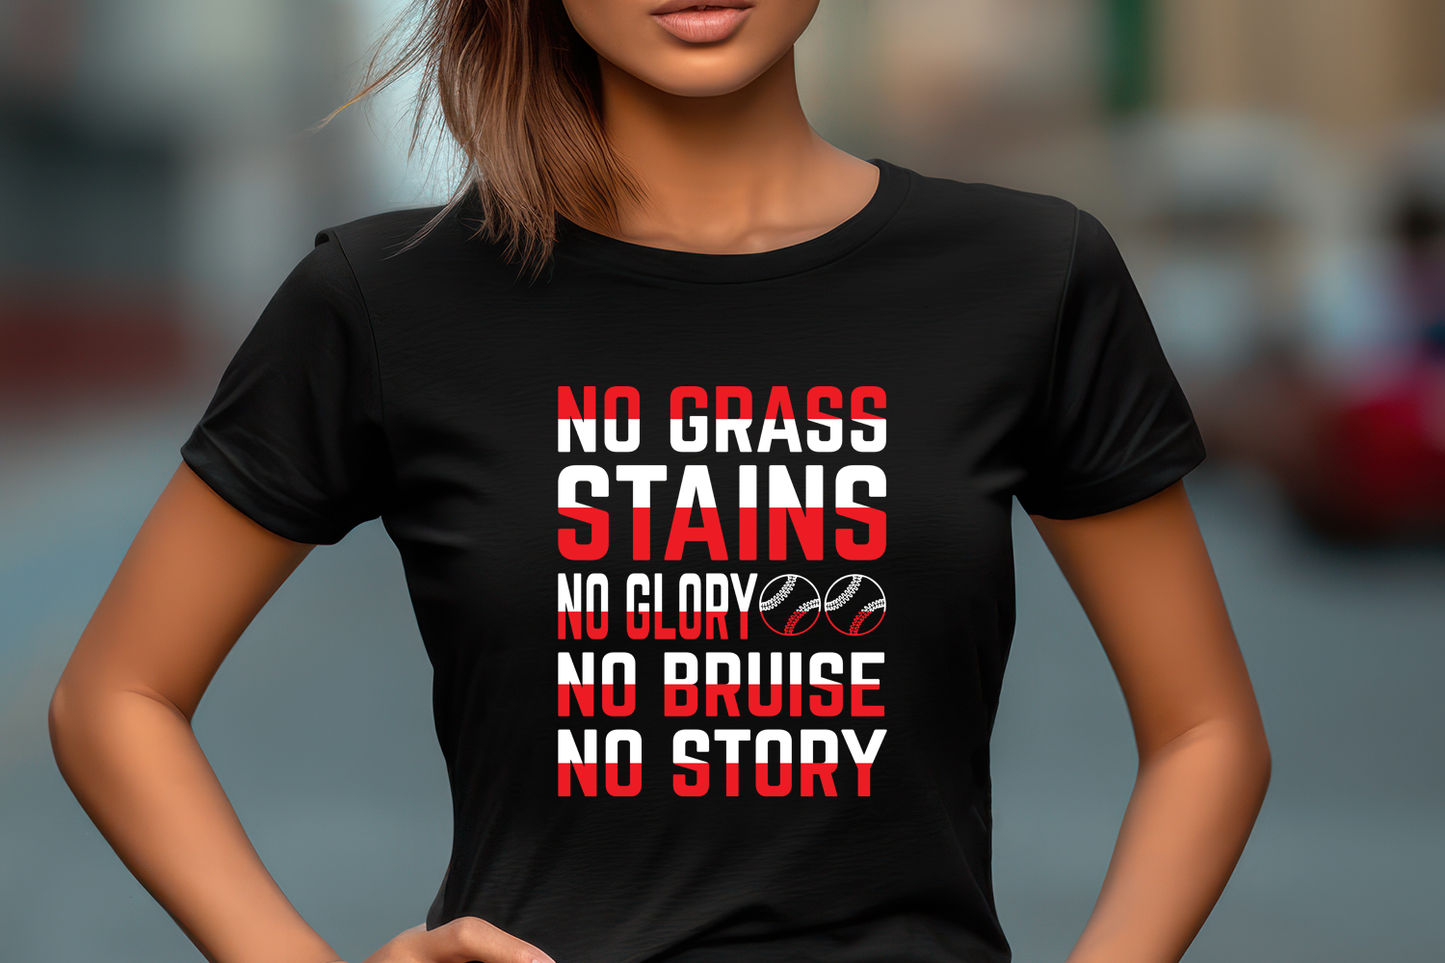 NO GRASS STAINS